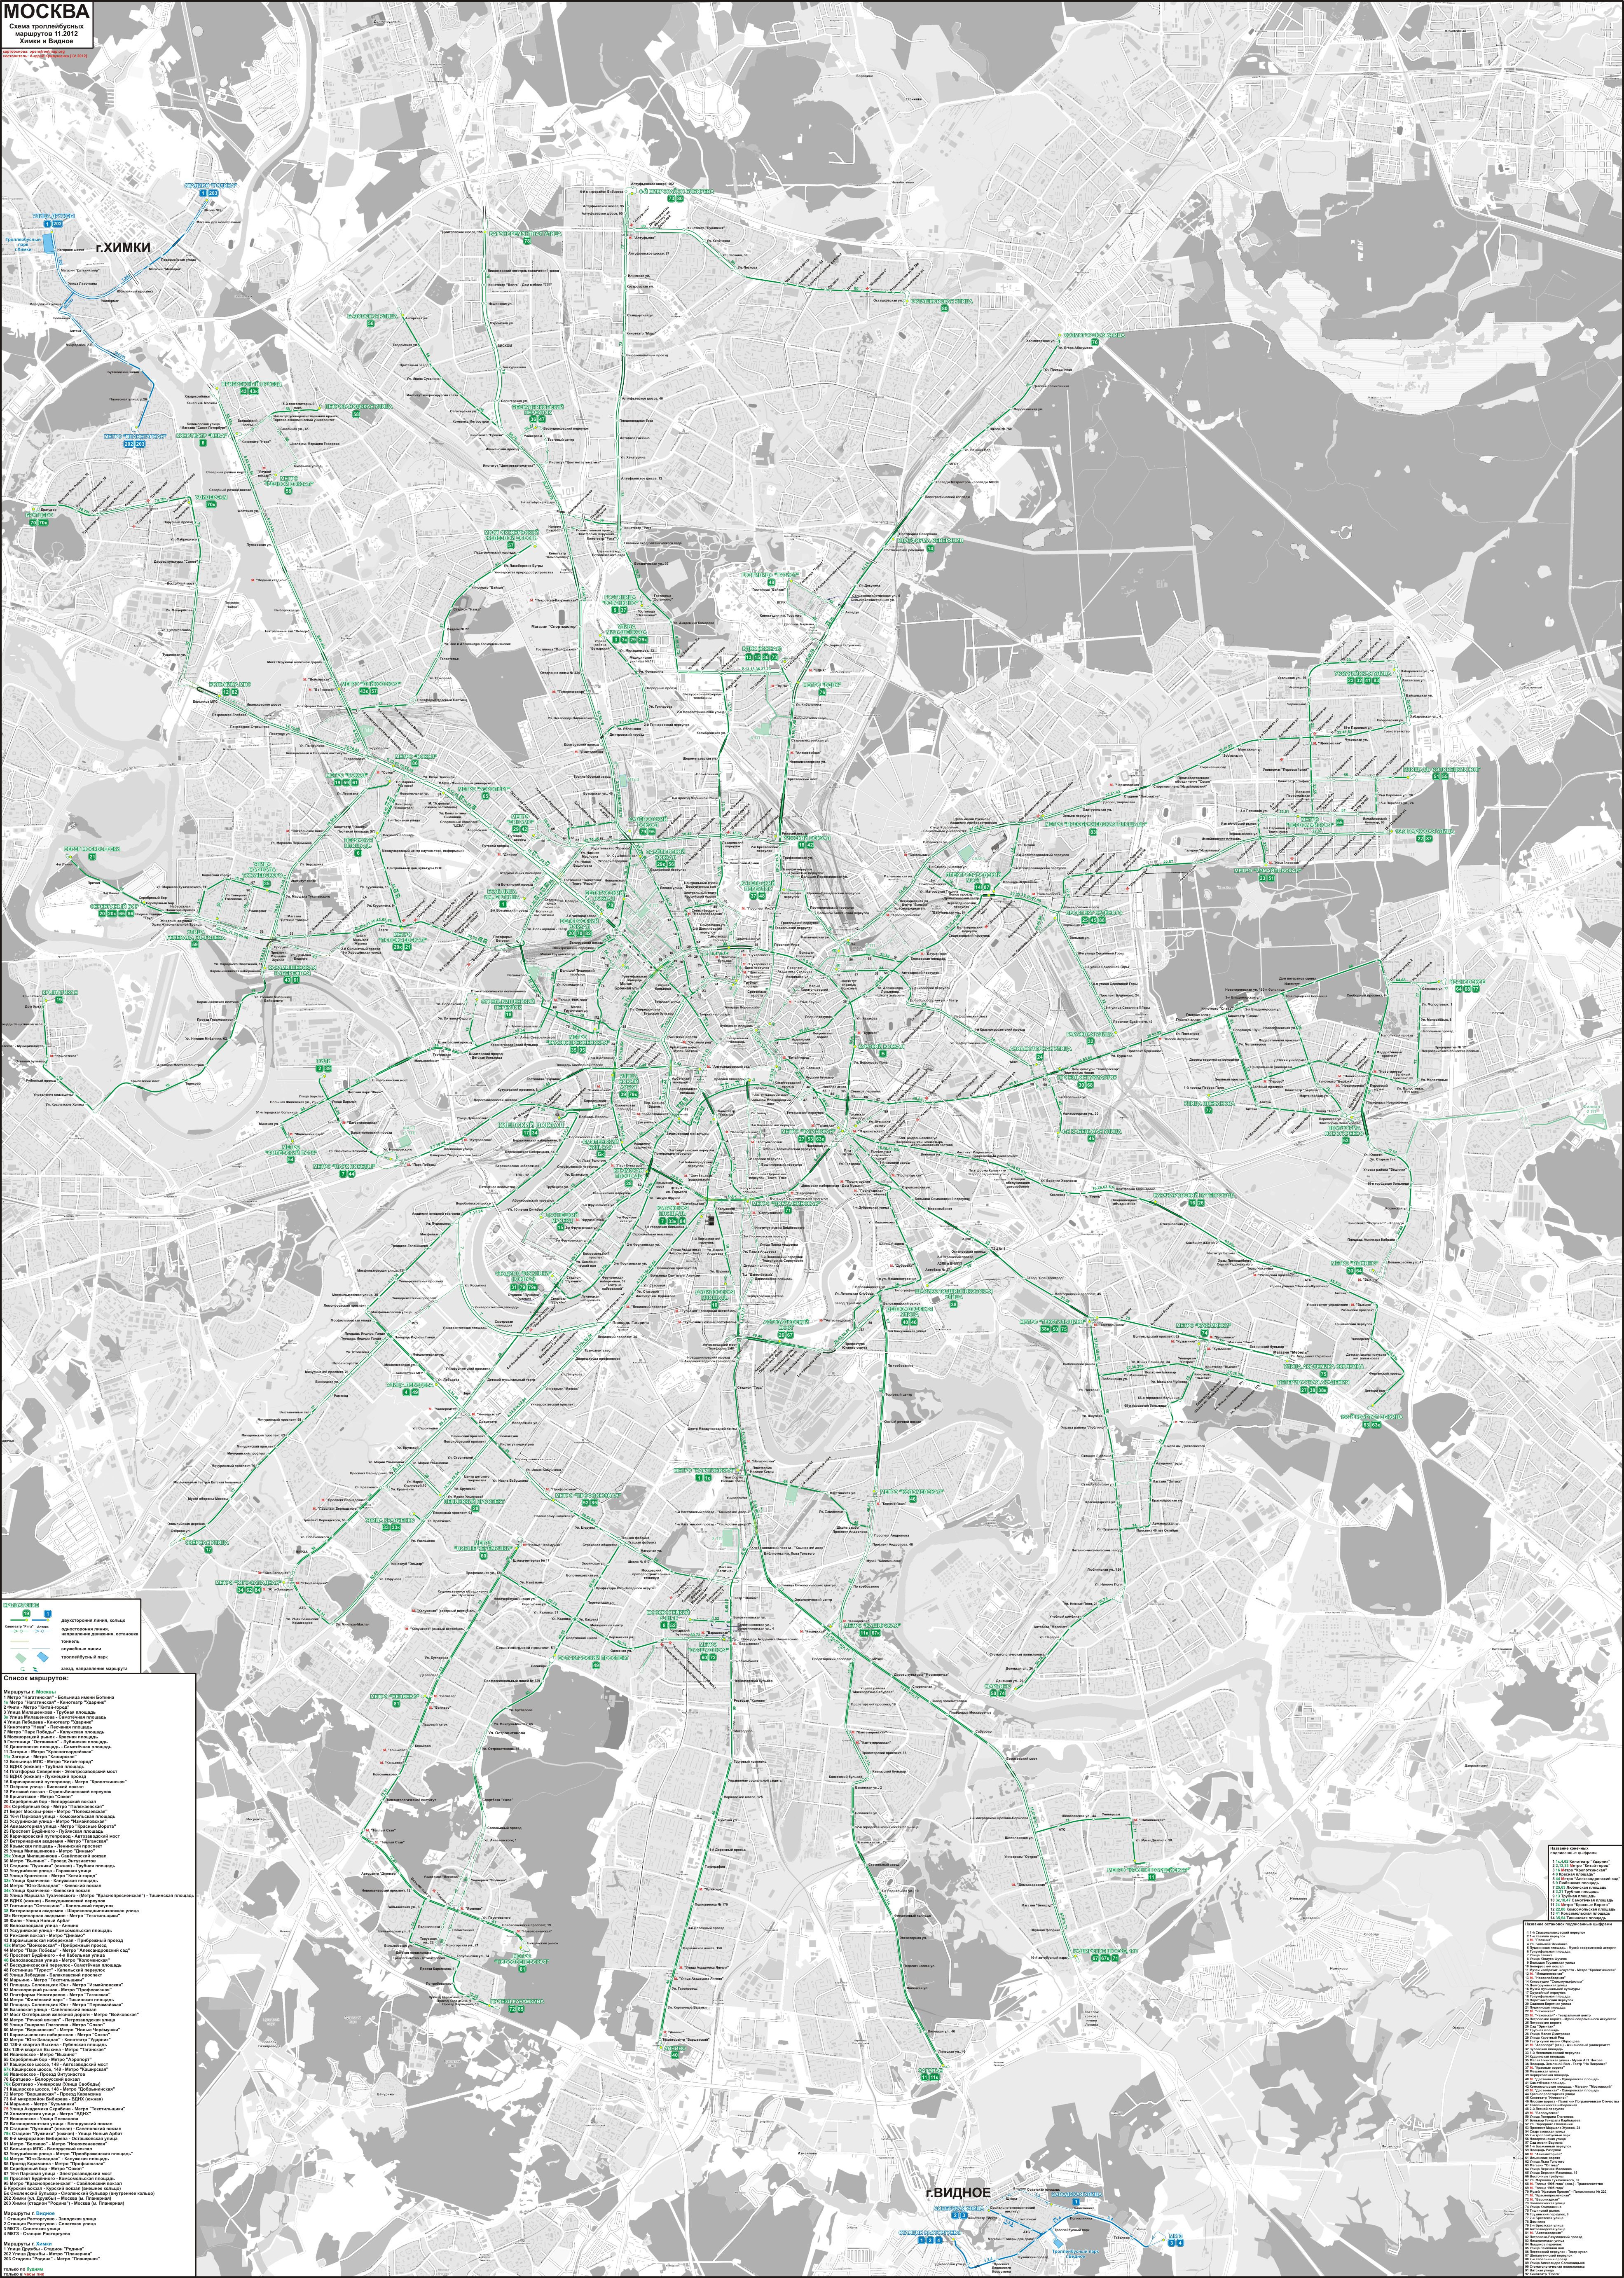 Moscow — Citywide Maps; Khimki — Maps; Vidnoye — Maps; Moscow — Tramway and Trolleybus Infrastructure Maps